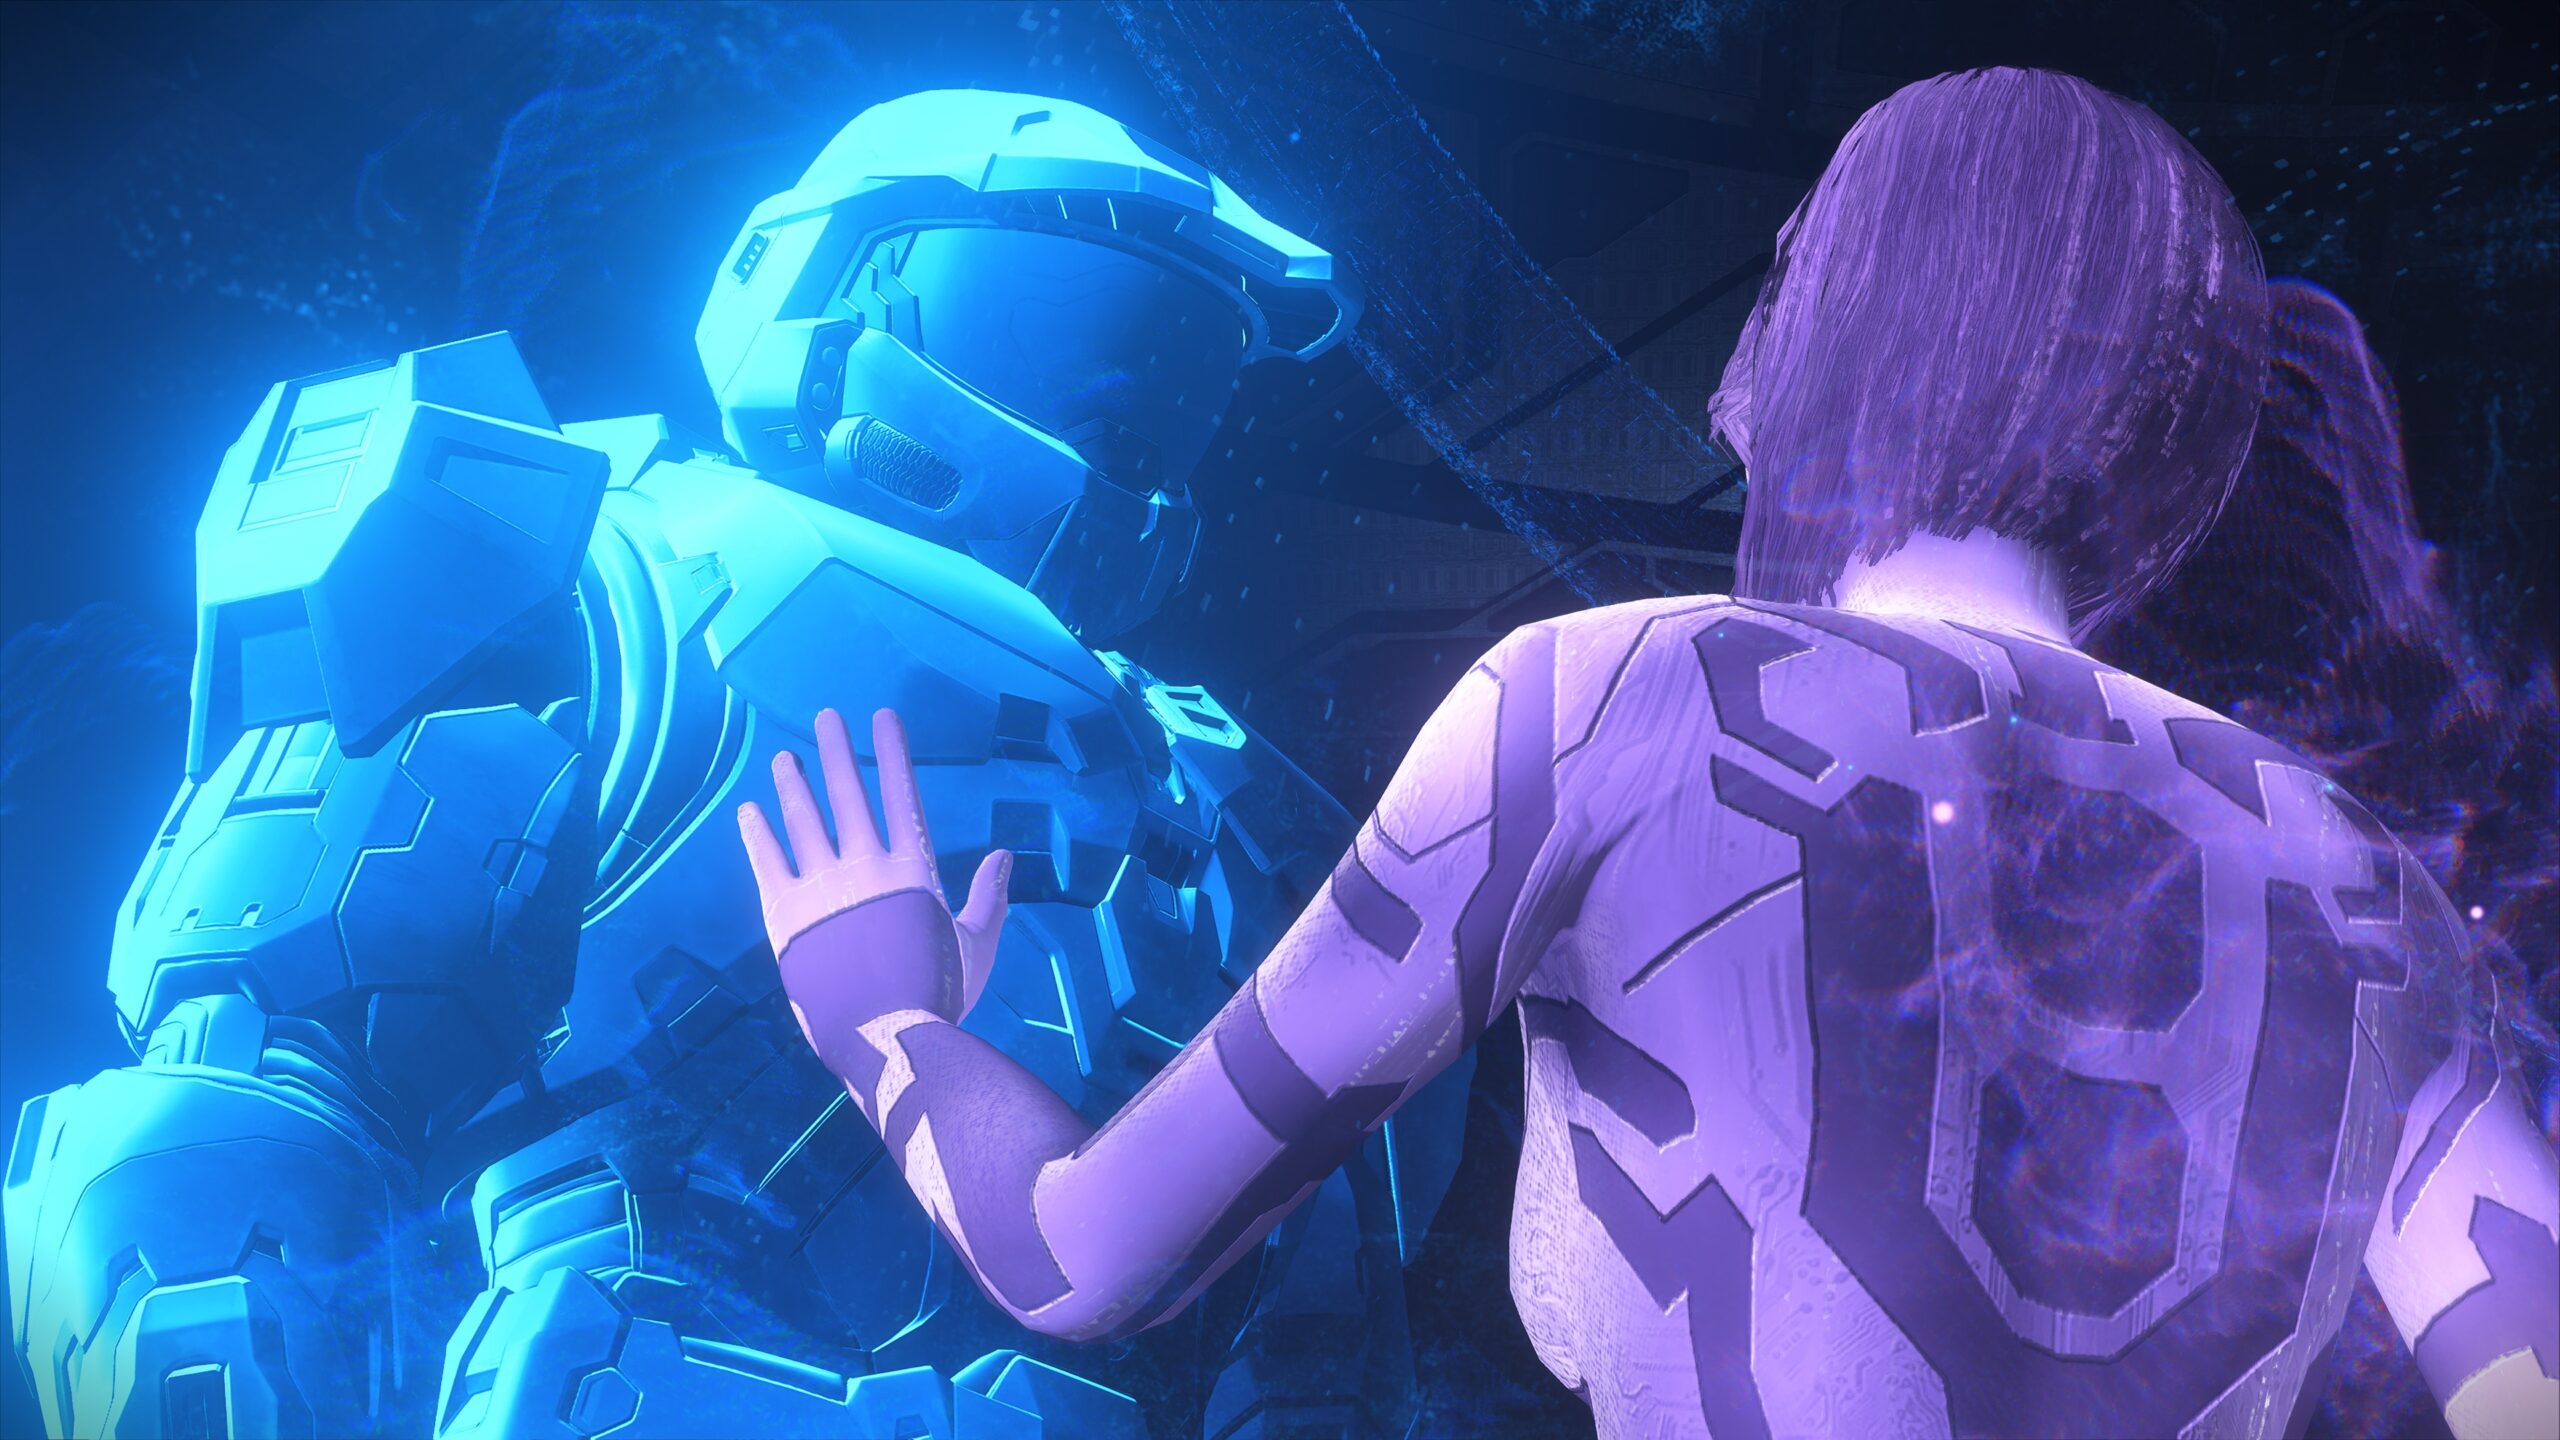 Screenshot of Cortana and John's farewell at the end of Halo 4 as it appears in Halo Infinite's campaign